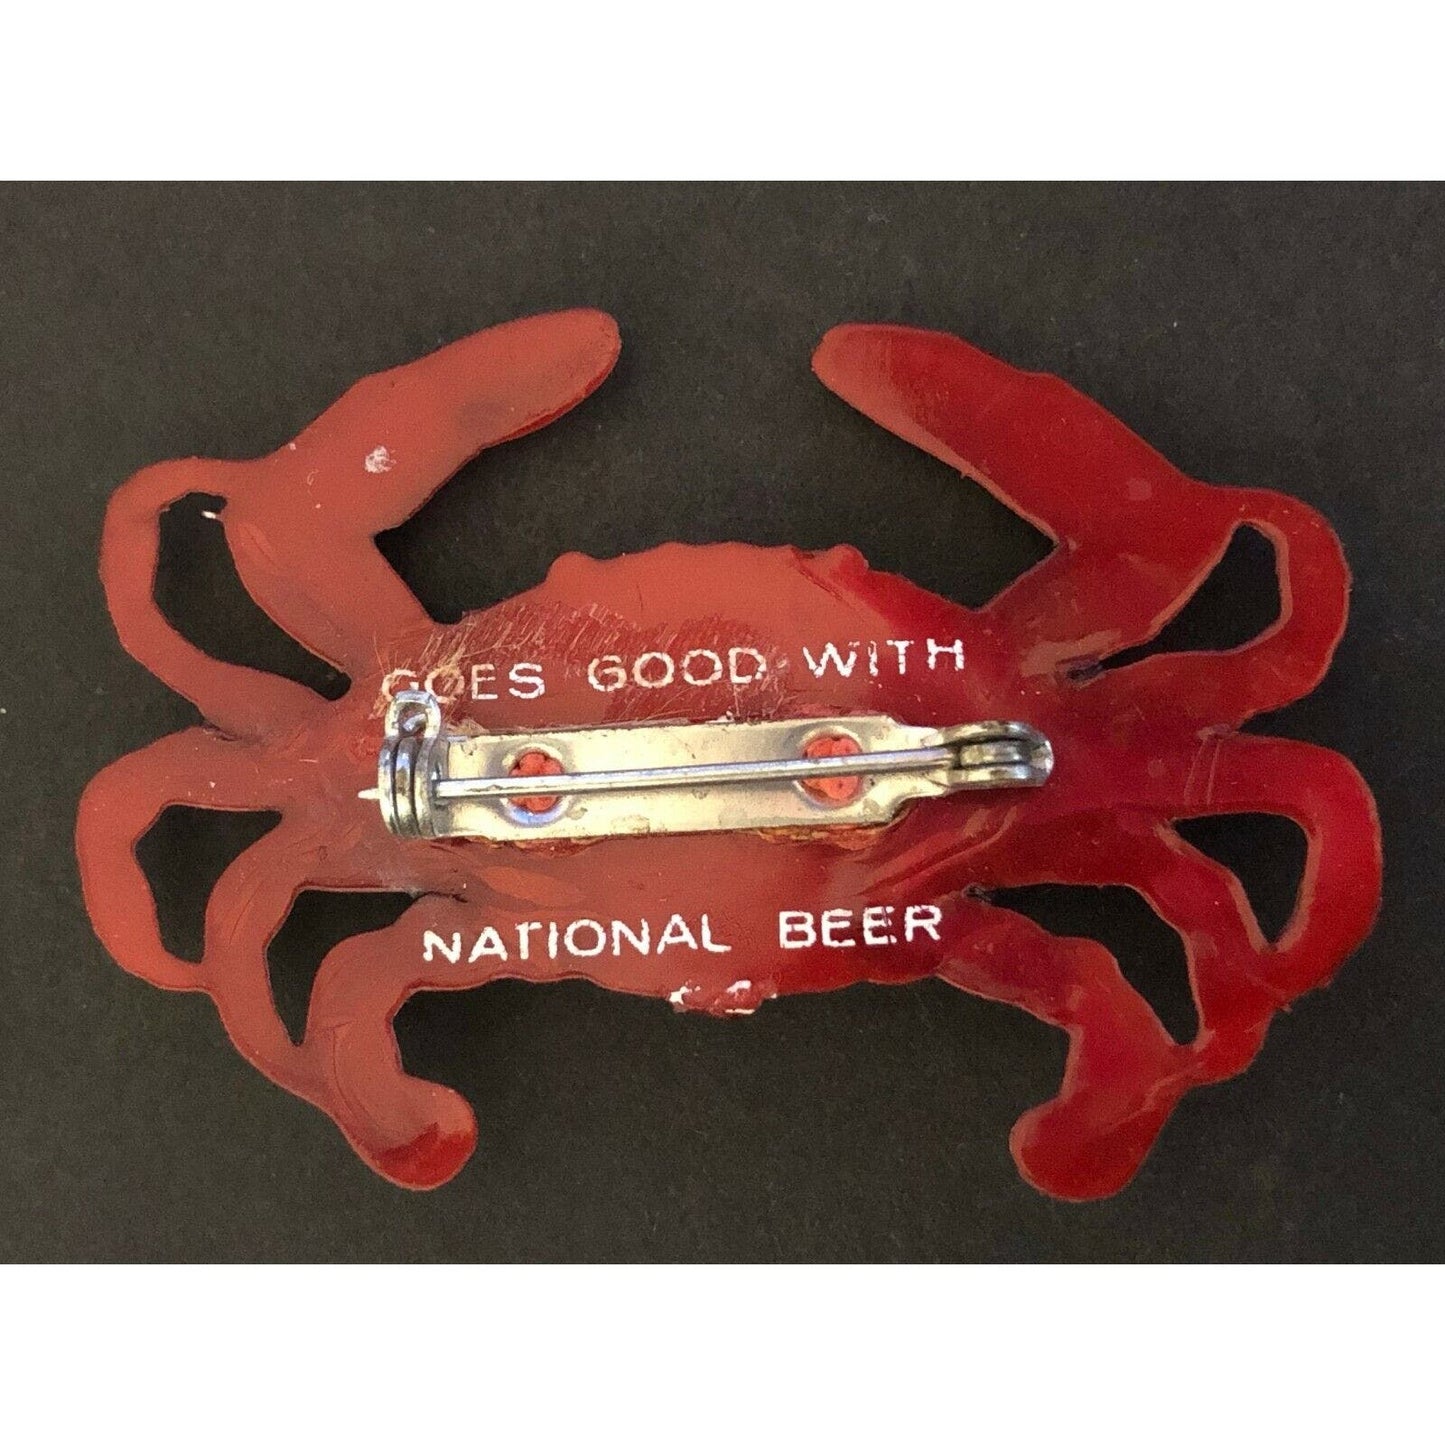 Vintage Plastic Lobster Lapel Pin "Goes Good With National Beer" c1960's-70's